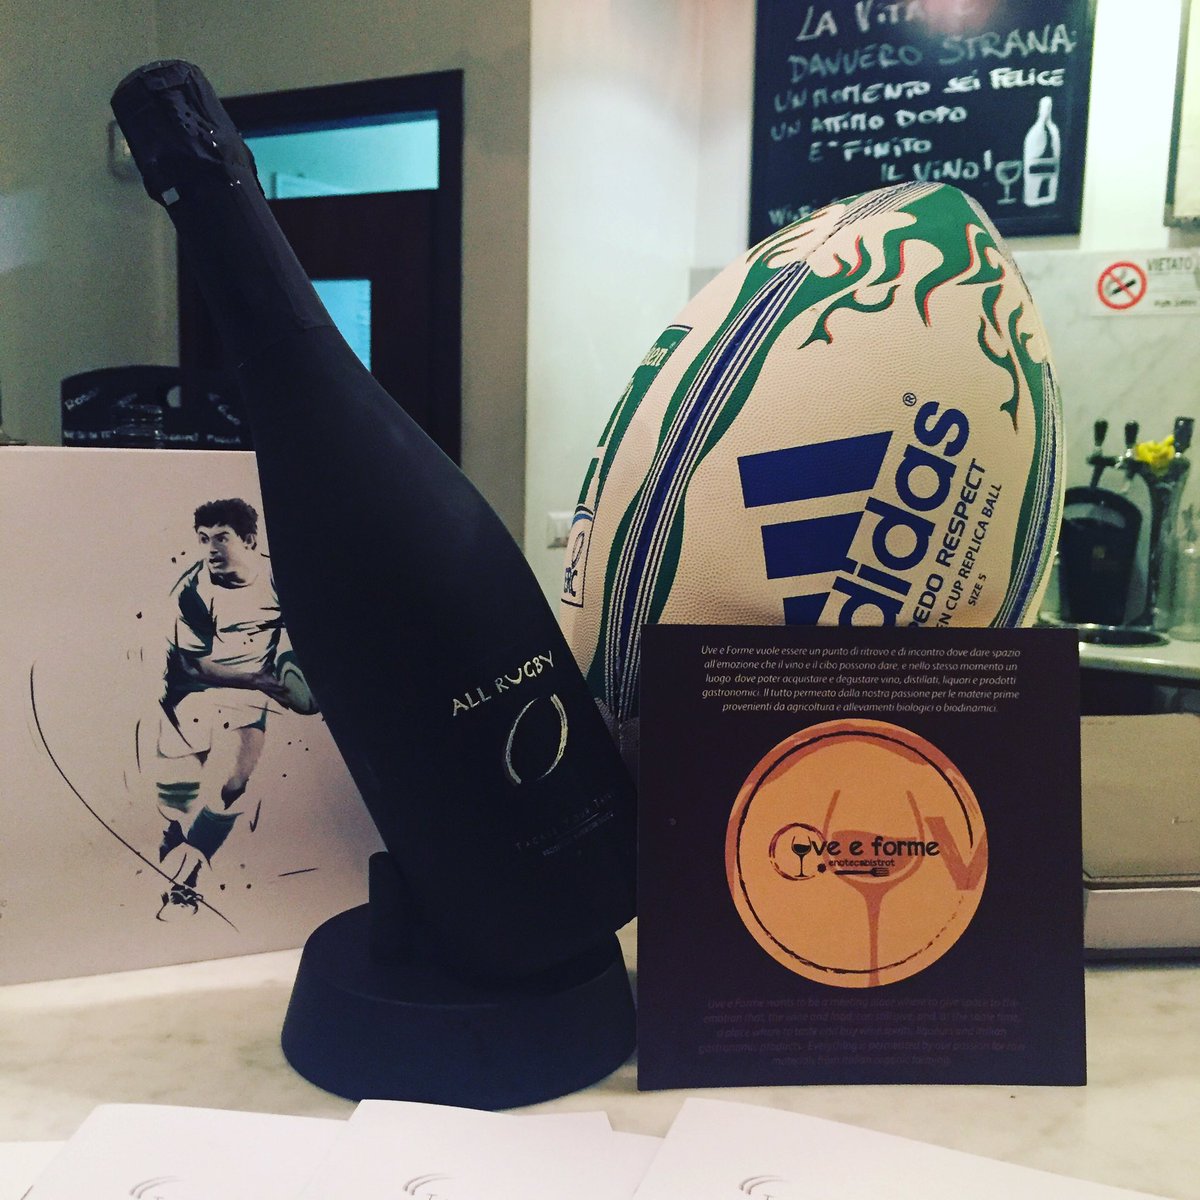 #sixnations #tackleyourthirst with #allrugbywine at #uveforme ! #wine #6nations #rugbytour  #goodfoodinrome #wineinrome #wheretoeatinrome